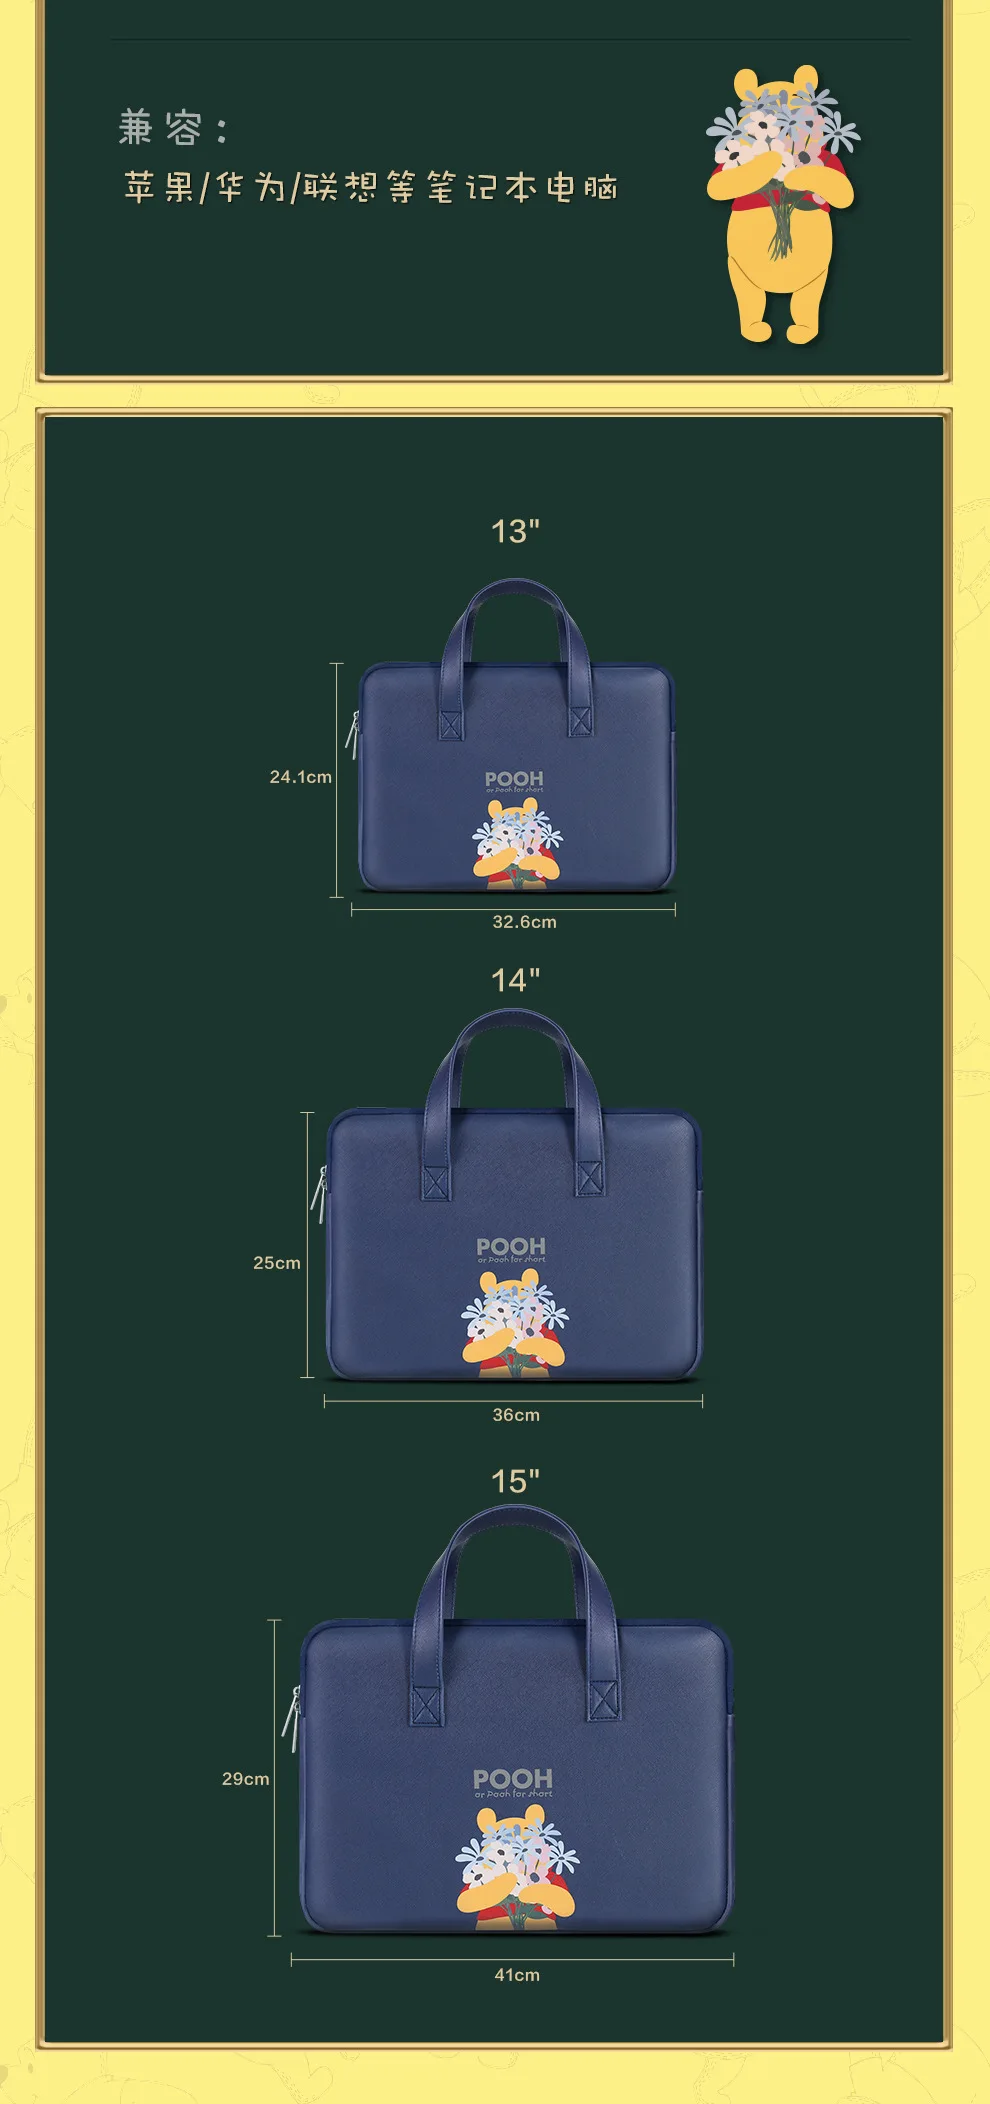 Cartoon Winnie The Pooh Laptop Sleeve Laptop Bag Tablet Briefcase Ultraportable Protective Handbag Oxford Cloth-for MacBook Pro/MacBook Air/Notebook Computer 13 inch